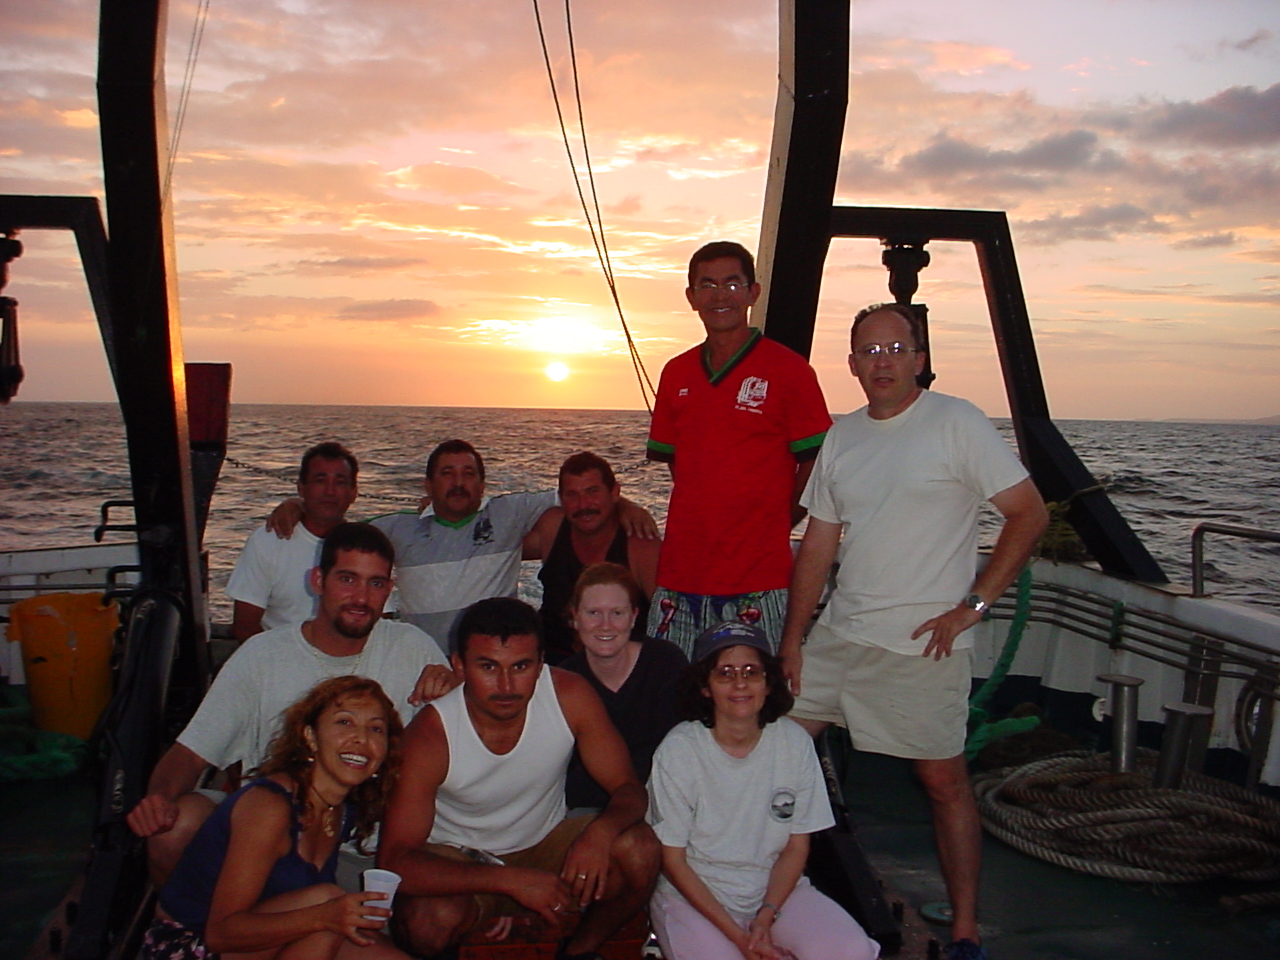 The sun sets on the 21-year CARIACO Ocean Time Series program, which was led by scientists from the U.S. and Venezuela and involved more than 100 researchers from the around the globe. Shown in the photo: Ramón Varela (Co-PI, EDIMAR/FLASA), Yrene Astor (Co-PI, EDIMAR/FLASA), José (Chuchú) Narváez (EDIMAR/FLASA), Aitzol Arellano (EDIMAR/FLASA), Michael McIntyre (USF/U.S.), Glenda Arias (EDIMAR/FLASA), Aparicio Narváez (First Officer), Maxi (crew), German Marin (Chef), and Julio (crew).